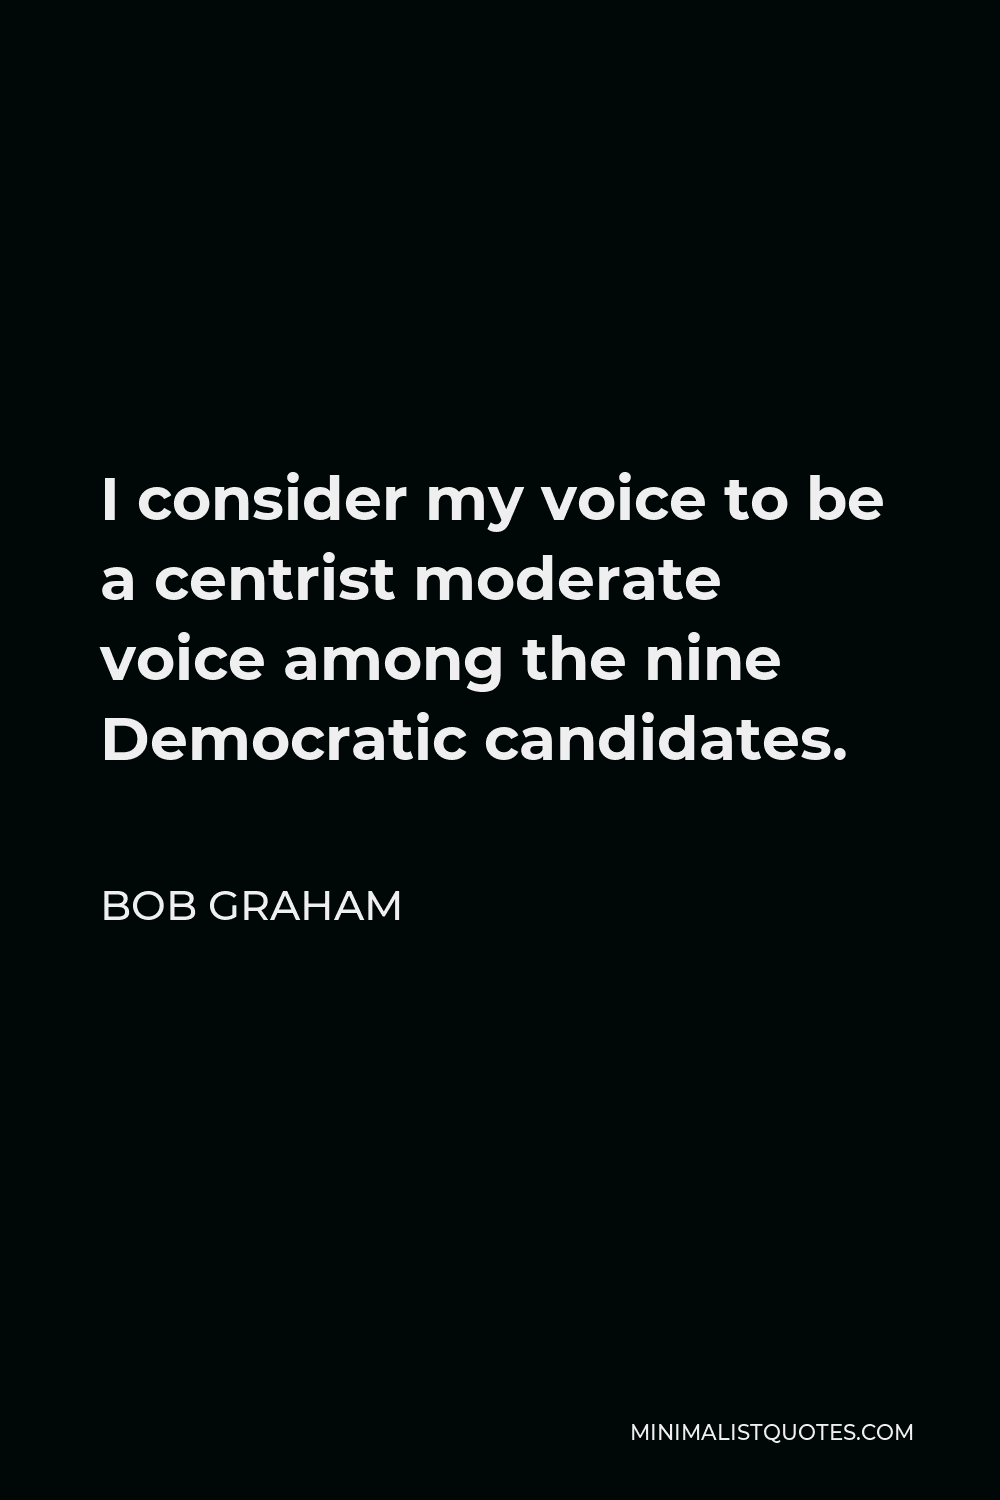 Bob Graham Quote - I consider my voice to be a centrist moderate voice among the nine Democratic candidates.